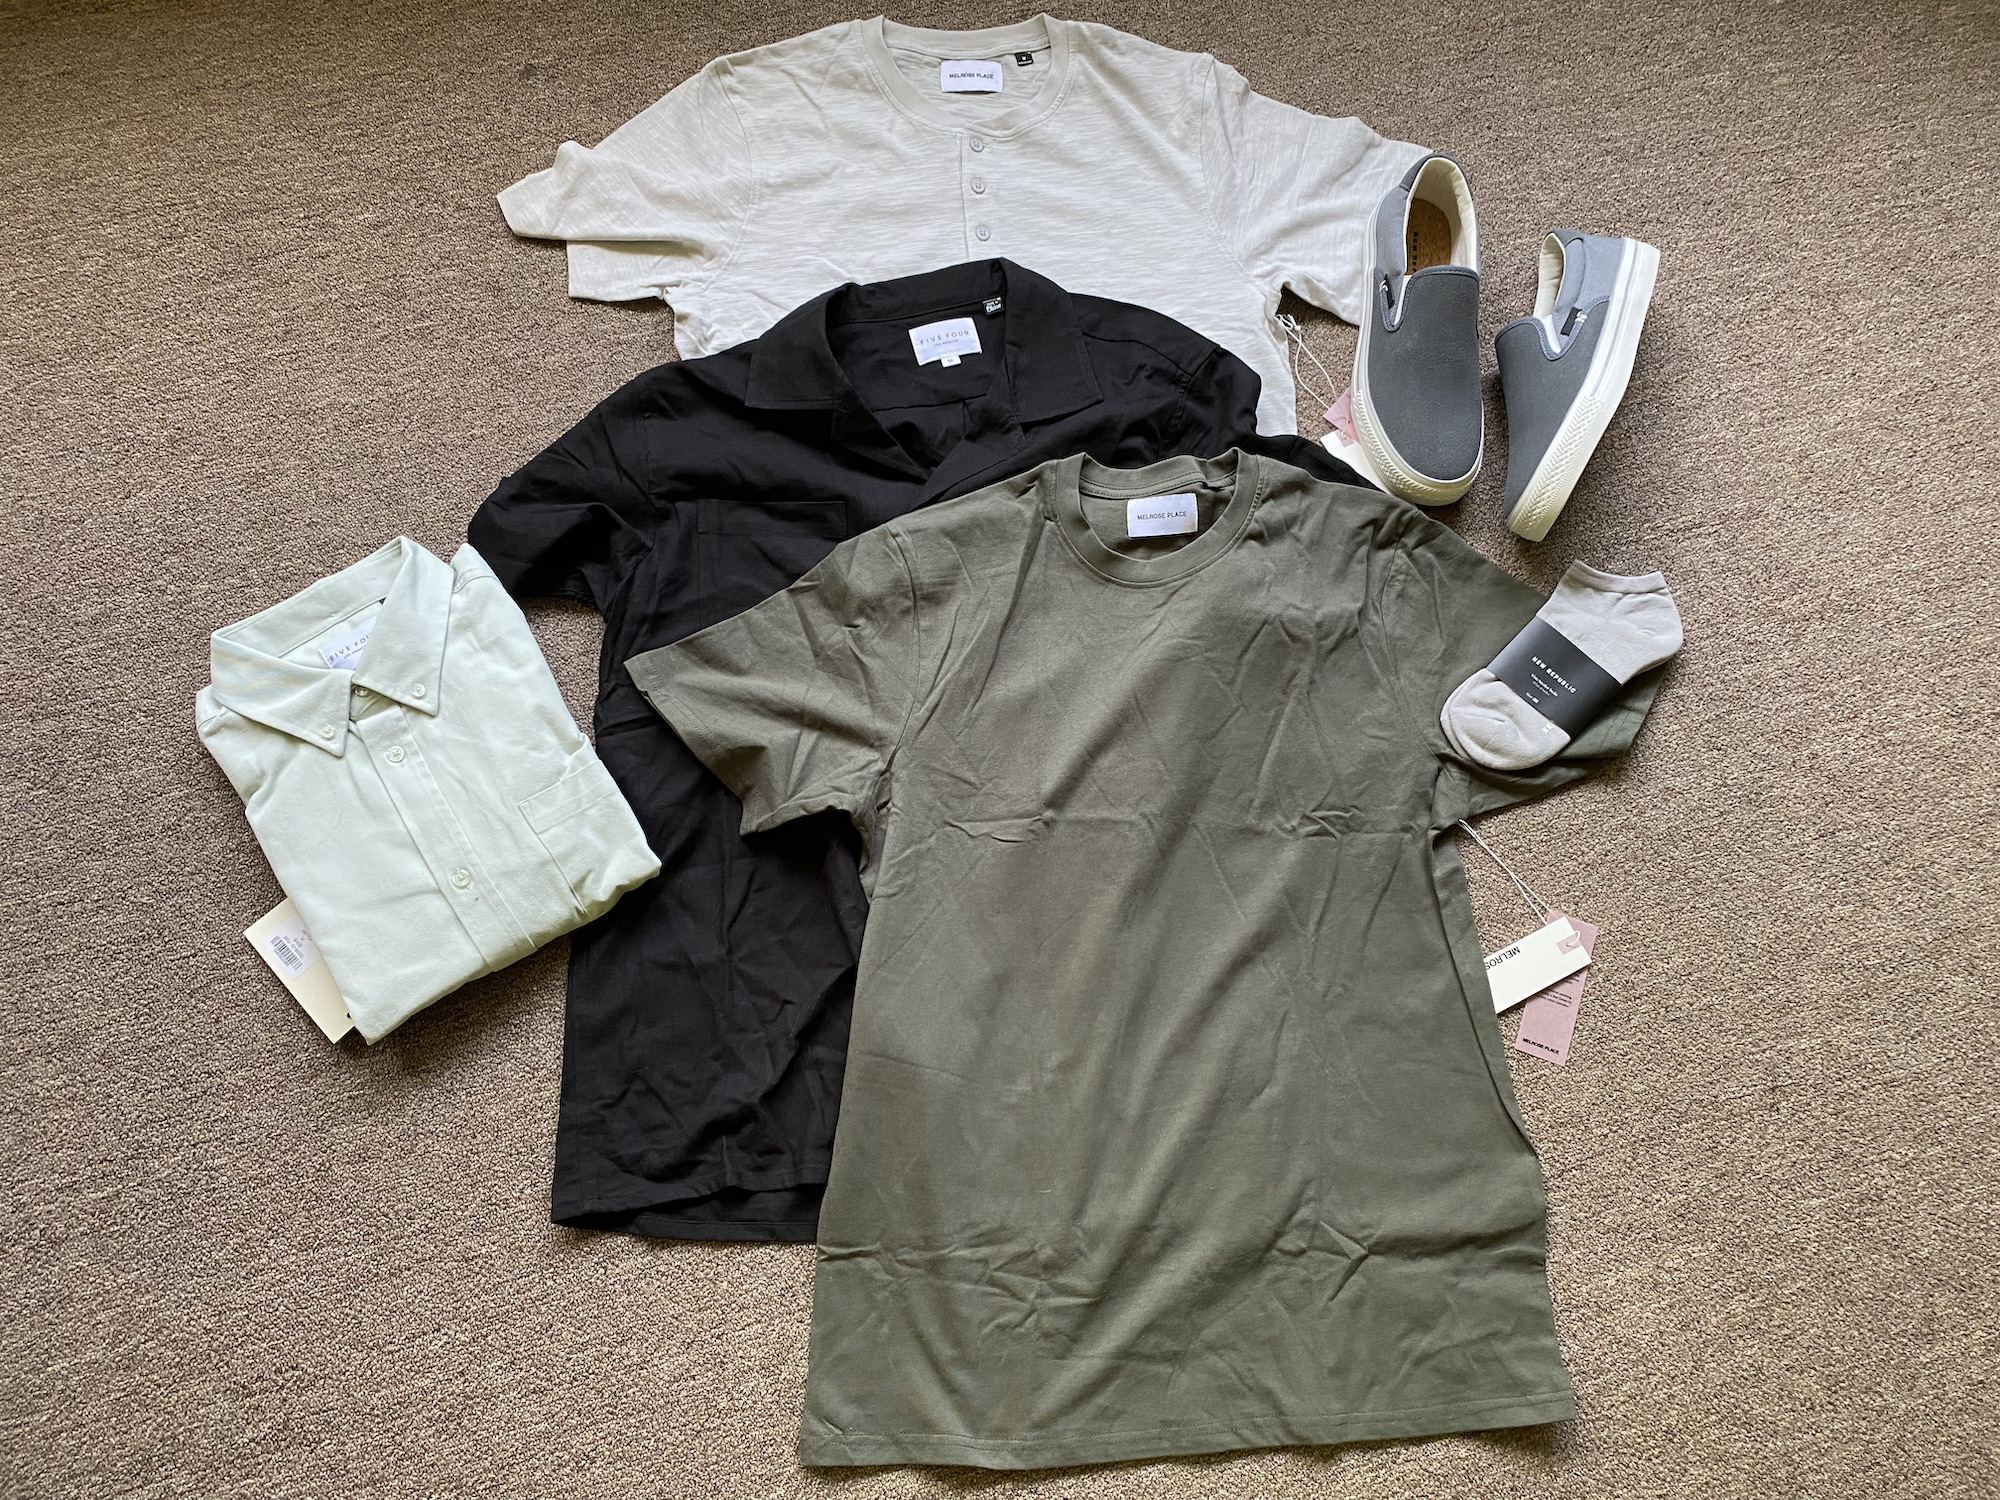 Menlo House Club Subscription Clothing Service For Men.